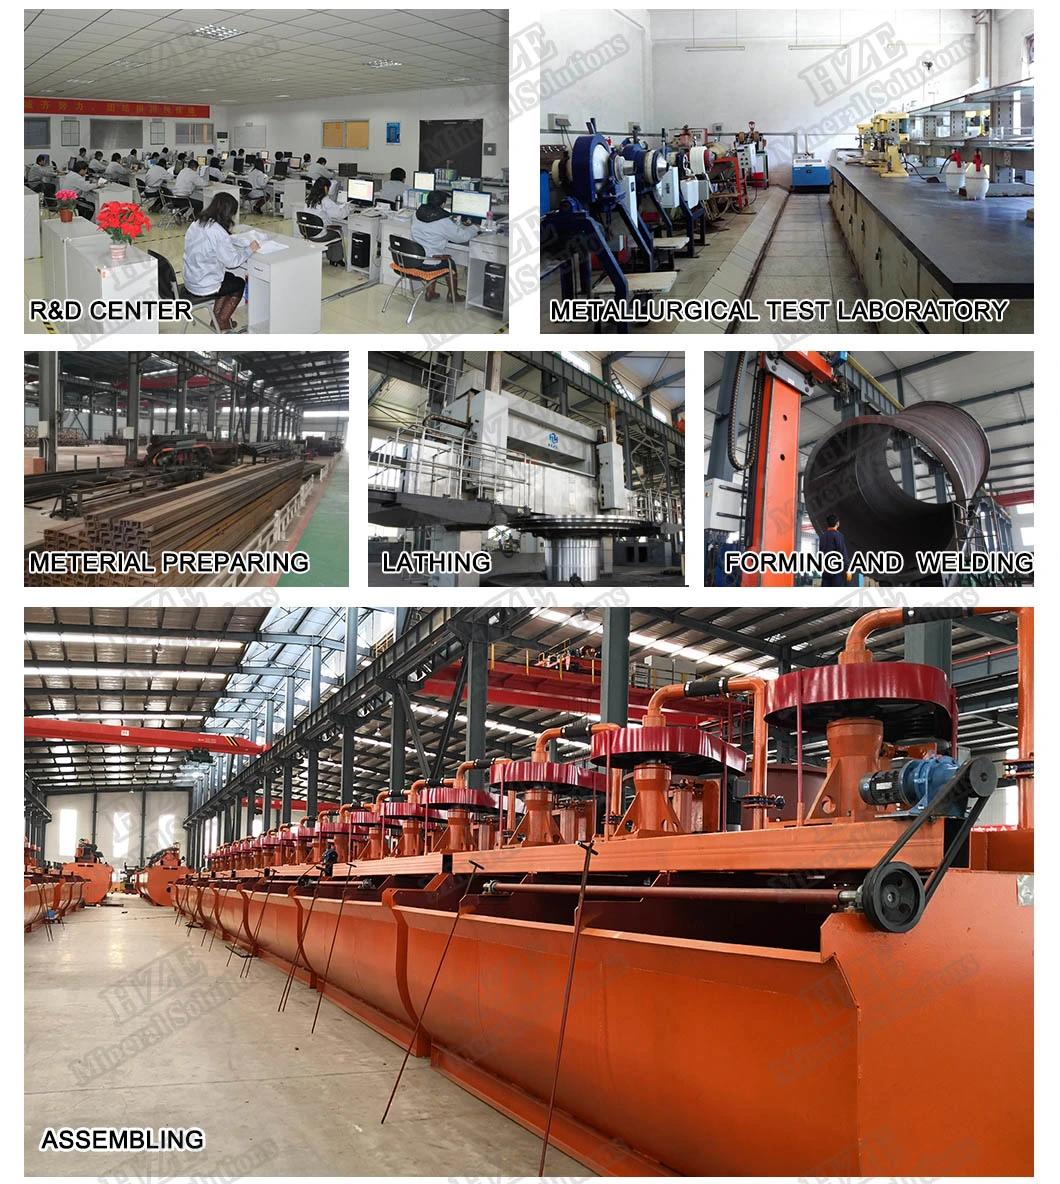 Mining Mineral Processing Stone / Rock Jaw Crusher